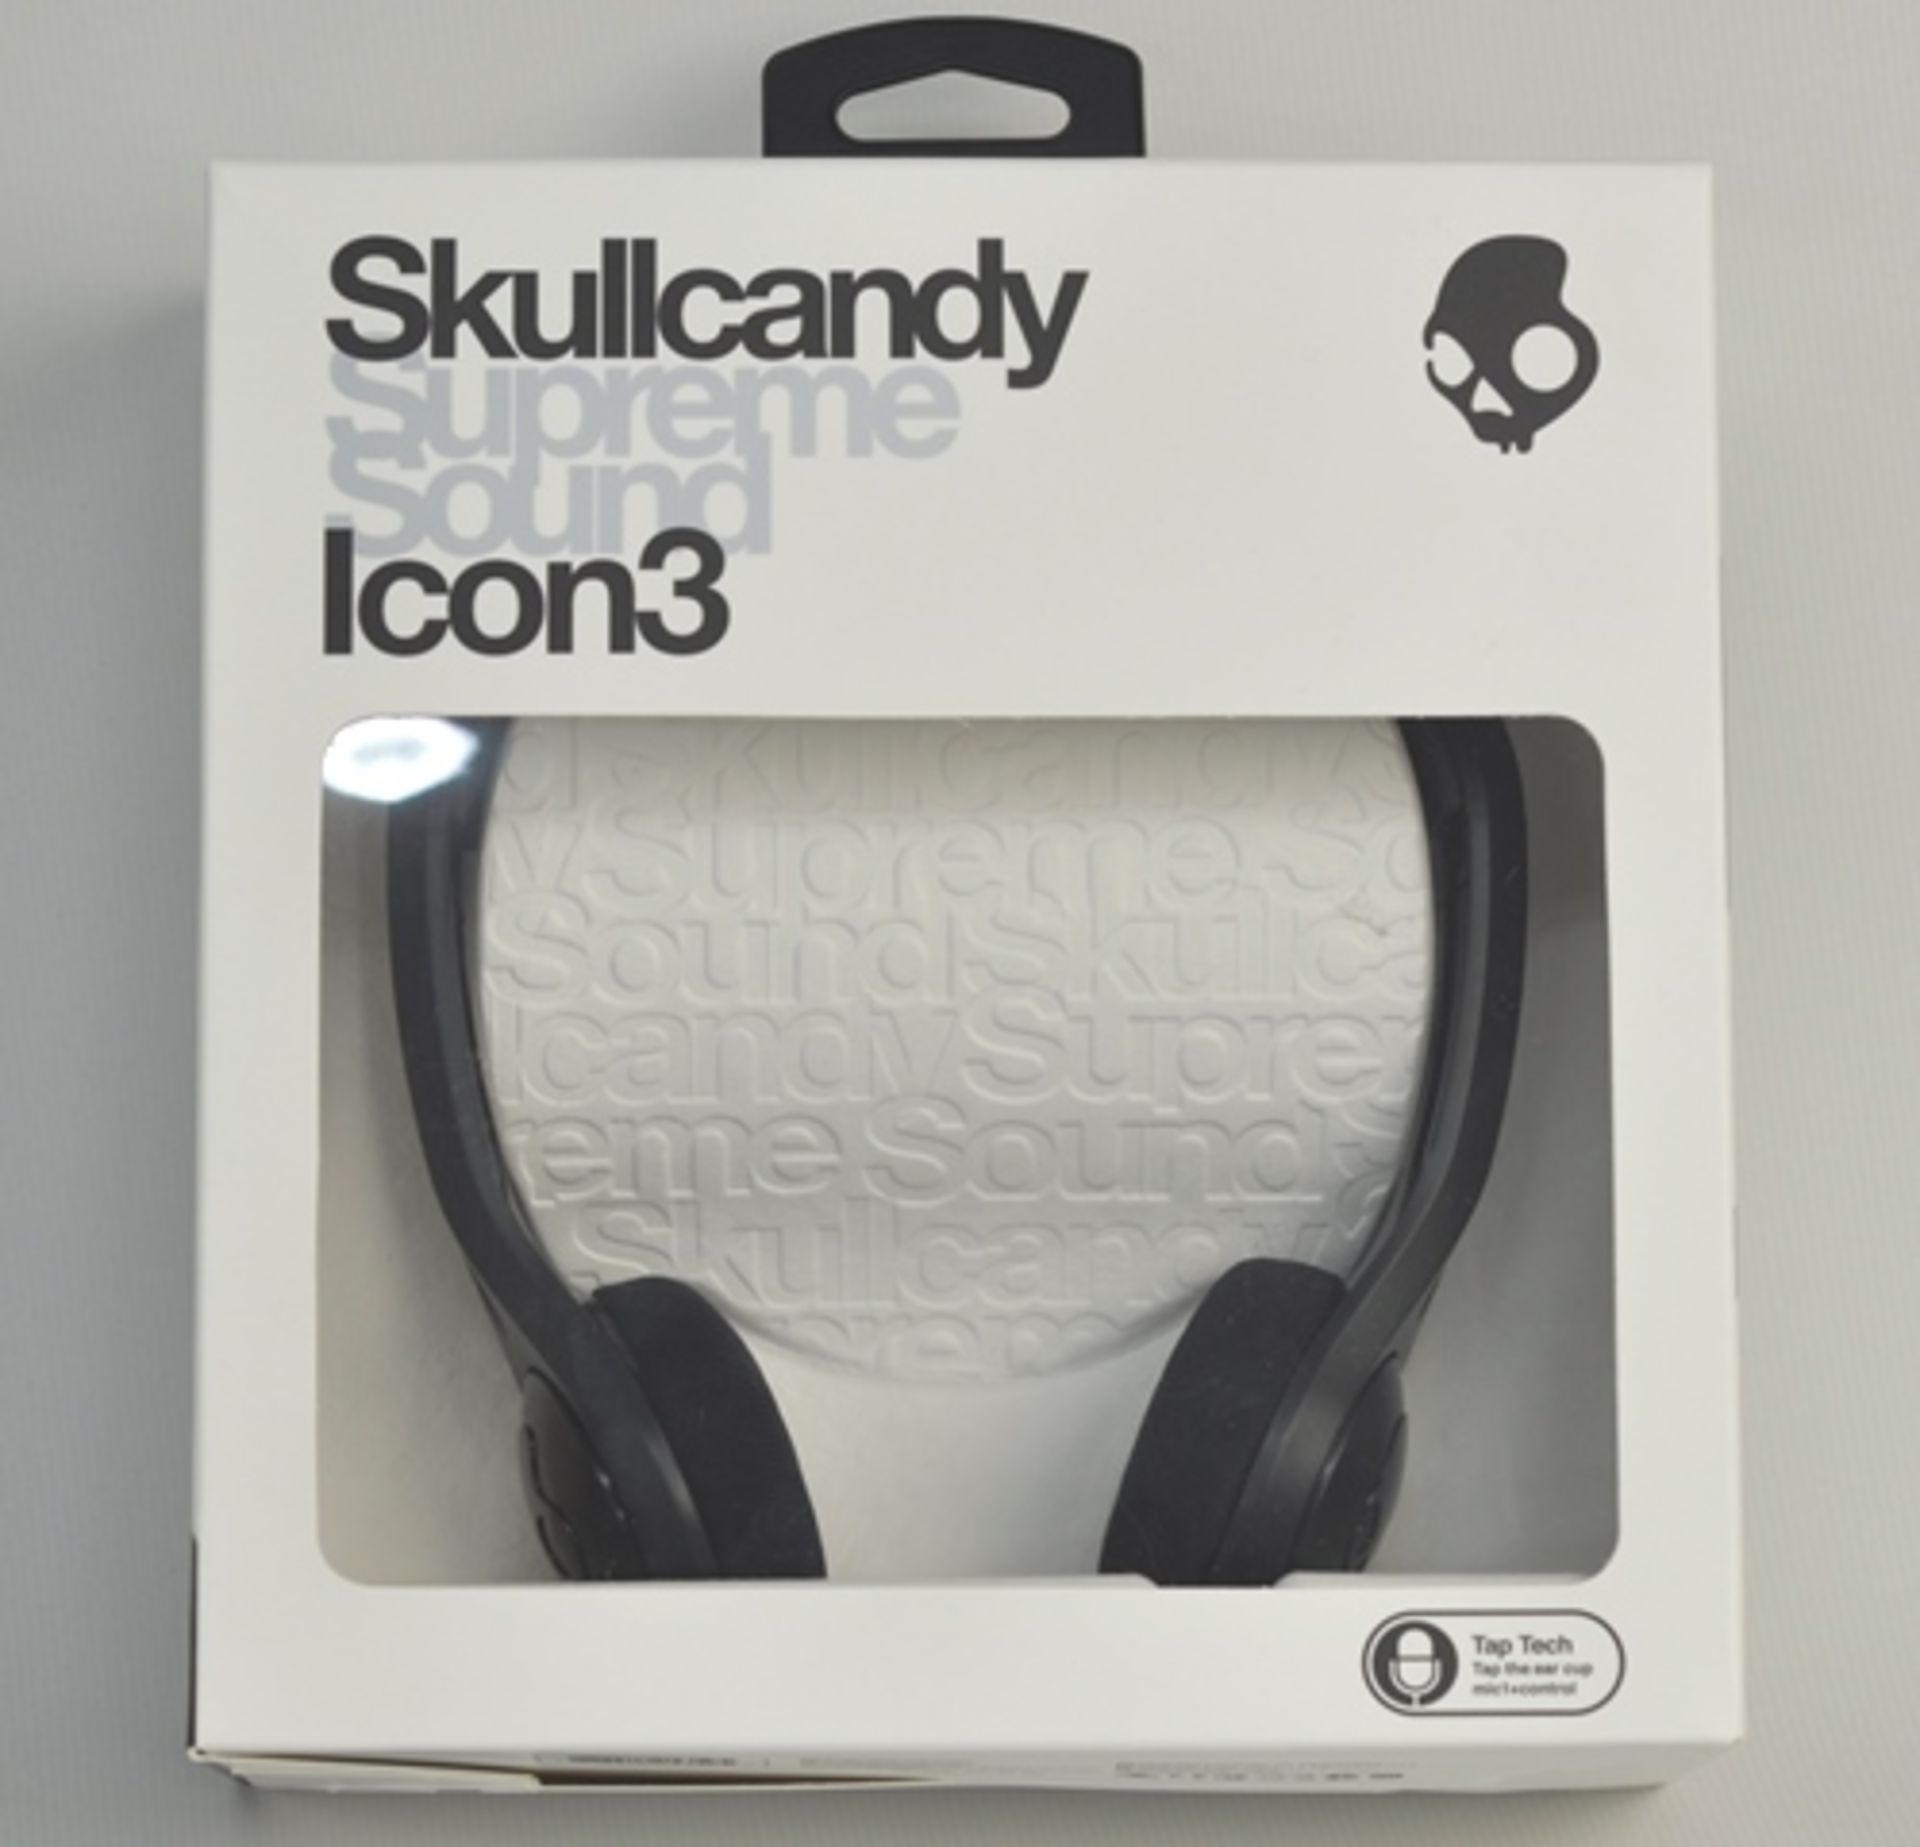 V Brand New Skullcandy Cassette Headphones - With Mic and Remote - Interchangeable Ear Pillows - - Image 2 of 2